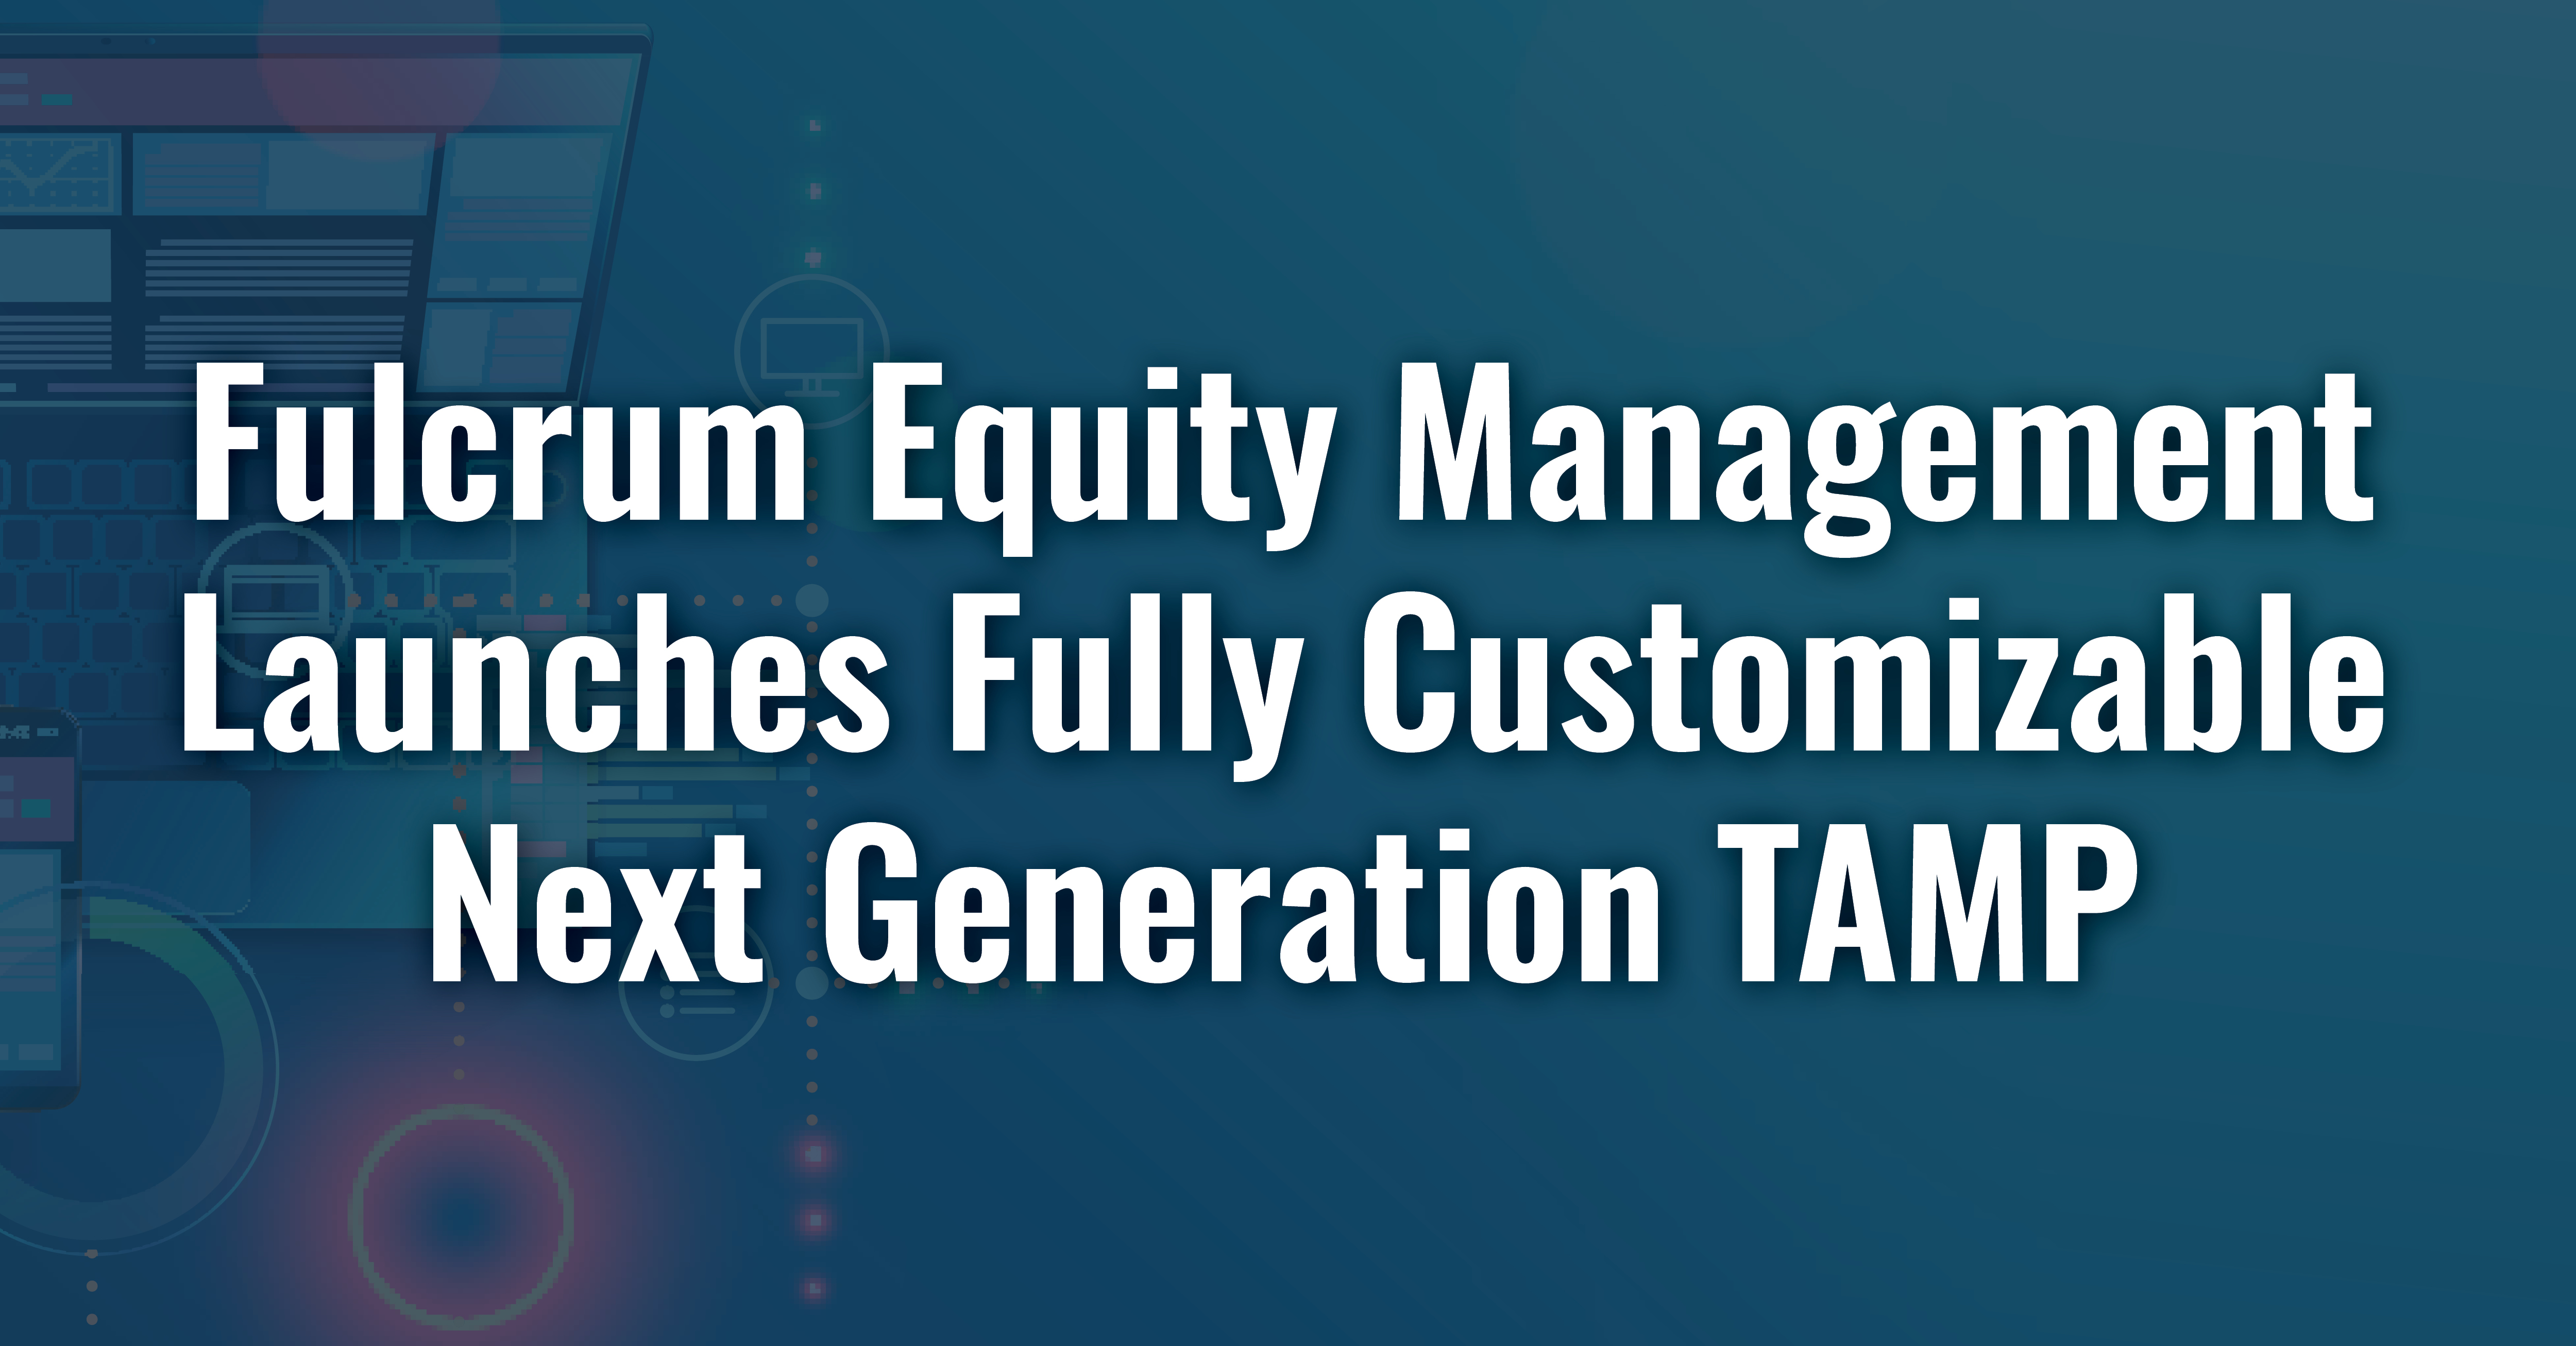 Fulcrum Equity Management Launches Fully Customizable Next Generation TAMP